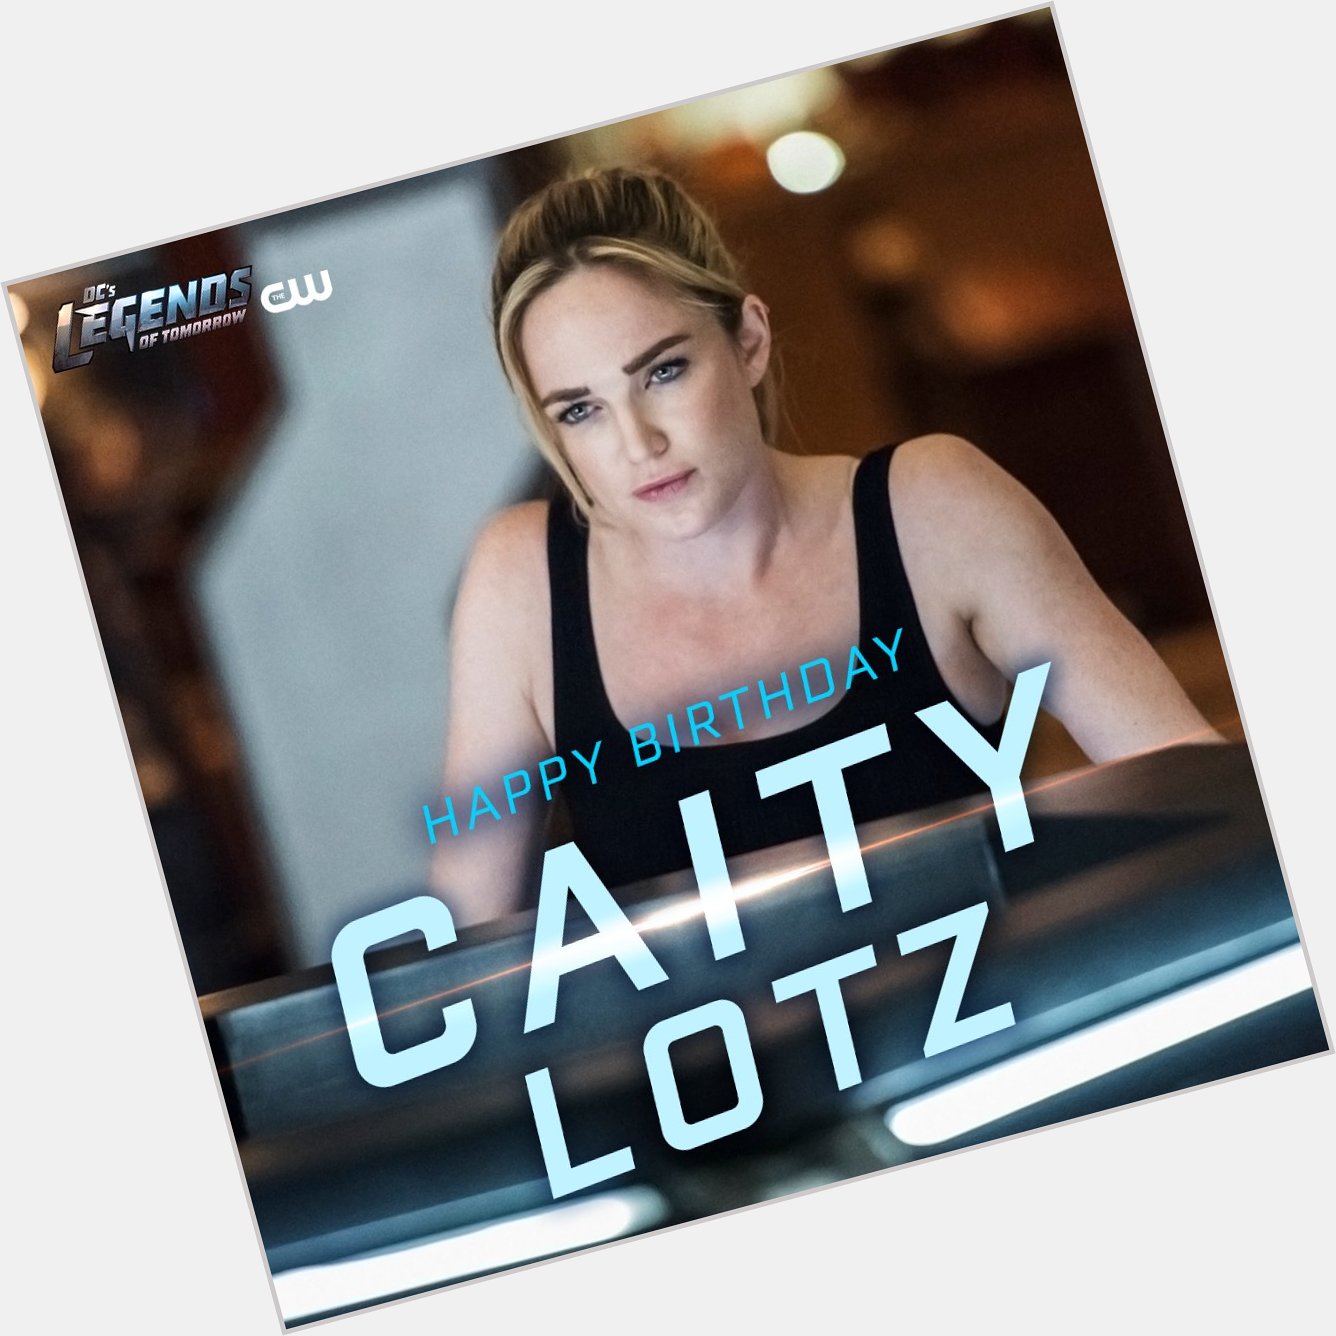 Awesome in every reality. Happy Birthday, Caity Lotz! 